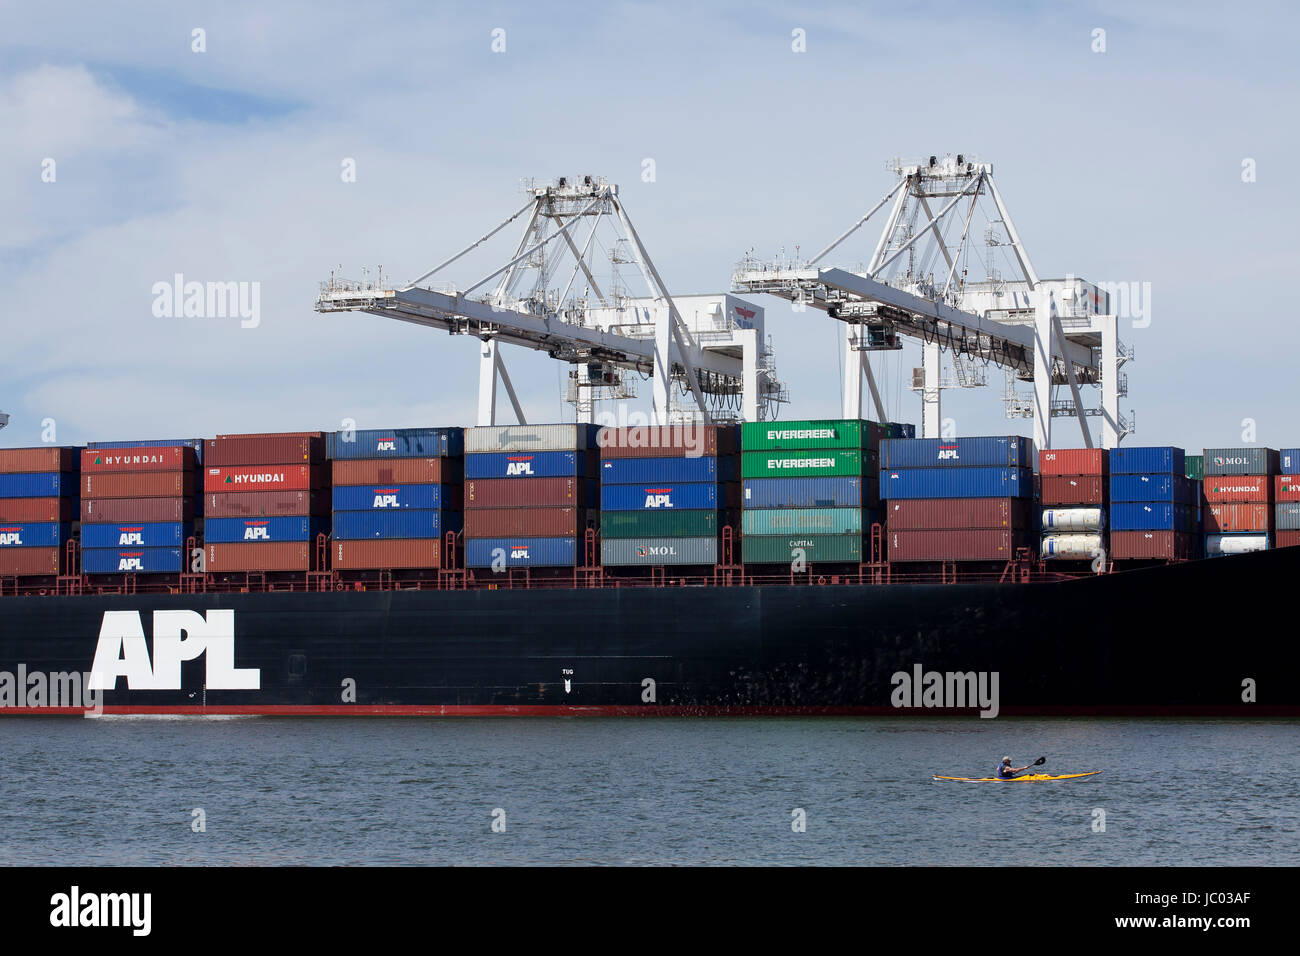 Man kayaking by APL shipping container ship docked Port of Oakland - California USA Stock Photo